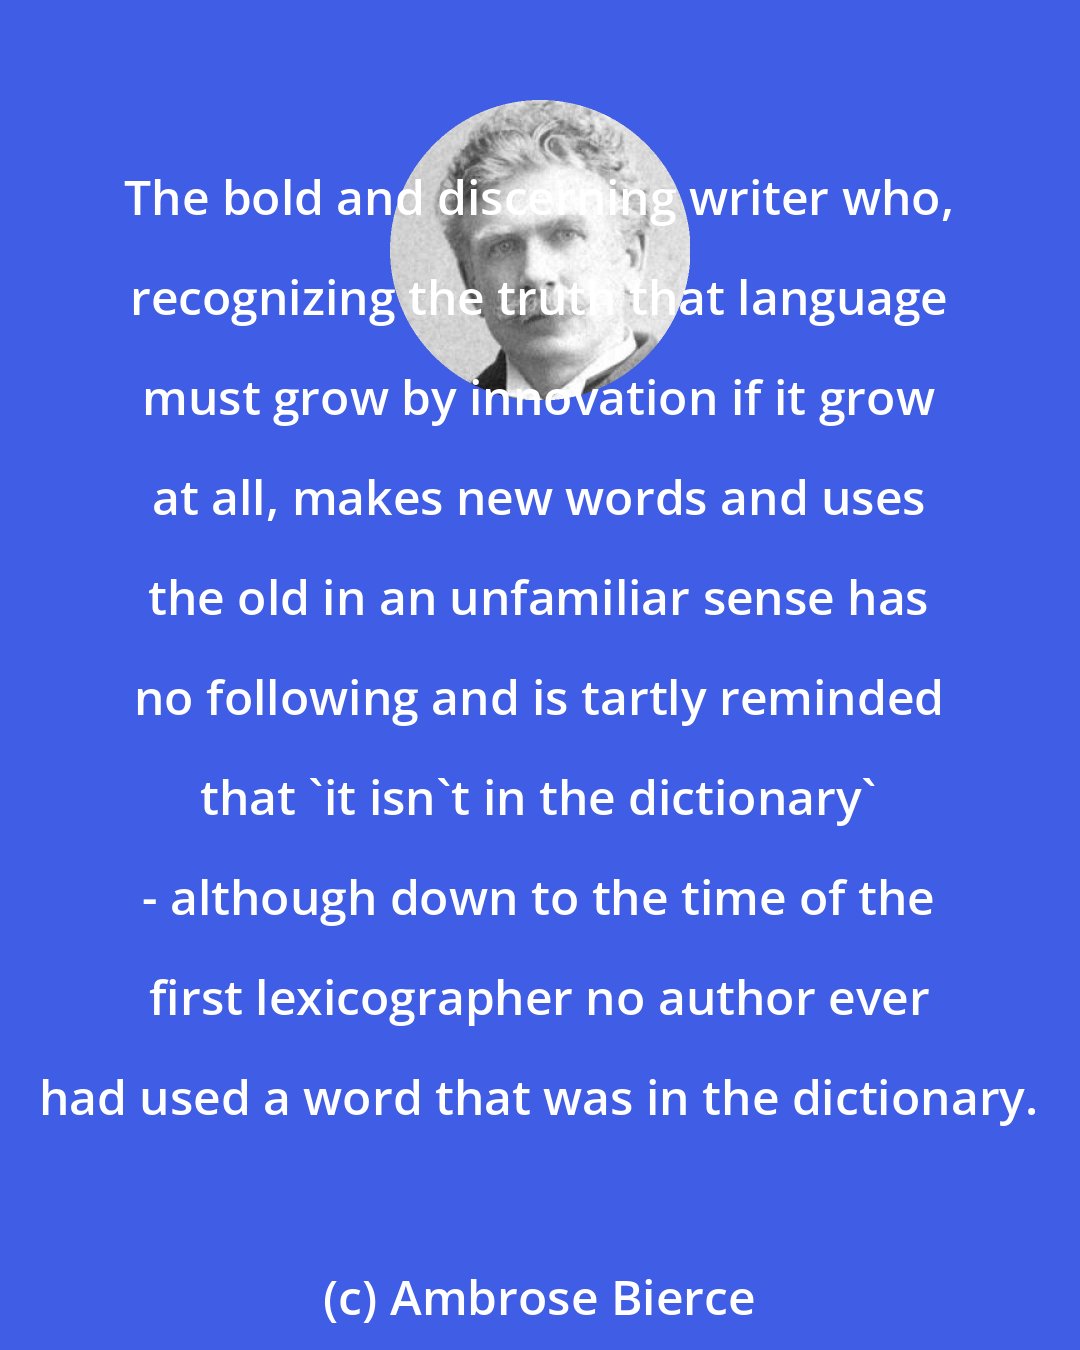 Ambrose Bierce: The bold and discerning writer who, recognizing the truth that language must grow by innovation if it grow at all, makes new words and uses the old in an unfamiliar sense has no following and is tartly reminded that 'it isn't in the dictionary' - although down to the time of the first lexicographer no author ever had used a word that was in the dictionary.